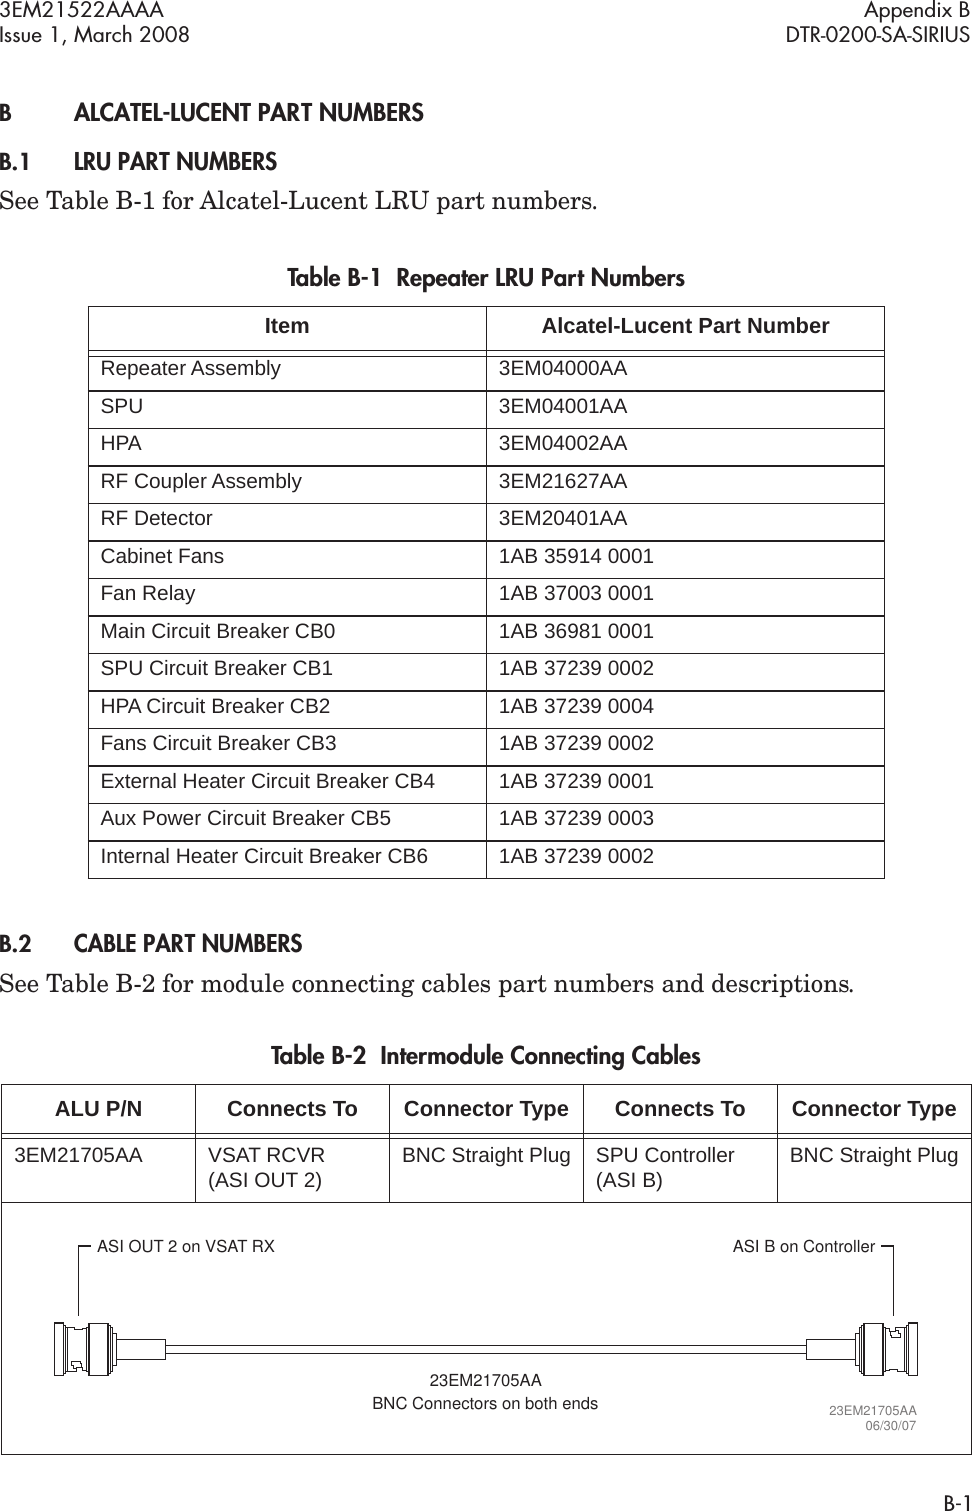 3EM21522AAAA Appendix BIssue 1, March 2008 DTR-0200-SA-SIRIUSB-1BALCATEL-LUCENT PART NUMBERSB.1LRU PART NUMBERS See Table B-1 for Alcatel-Lucent LRU part numbers.B.2CABLE PART NUMBERS See Table B-2 for module connecting cables part numbers and descriptions.Table B-1  Repeater LRU Part NumbersItem Alcatel-Lucent Part NumberRepeater Assembly 3EM04000AASPU 3EM04001AAHPA 3EM04002AARF Coupler Assembly 3EM21627AARF Detector 3EM20401AACabinet Fans 1AB 35914 0001Fan Relay 1AB 37003 0001Main Circuit Breaker CB0 1AB 36981 0001SPU Circuit Breaker CB1 1AB 37239 0002HPA Circuit Breaker CB2 1AB 37239 0004Fans Circuit Breaker CB3 1AB 37239 0002External Heater Circuit Breaker CB4 1AB 37239 0001Aux Power Circuit Breaker CB5 1AB 37239 0003Internal Heater Circuit Breaker CB6 1AB 37239 0002Table B-2  Intermodule Connecting Cables  ALU P/N Connects To Connector Type Connects To Connector Type3EM21705AA VSAT RCVR(ASI OUT 2) BNC Straight Plug SPU Controller (ASI B) BNC Straight Plug23EM21705AABNC Connectors on both endsASI OUT 2 on VSAT RX ASI B on Controller23EM21705AA06/30/07